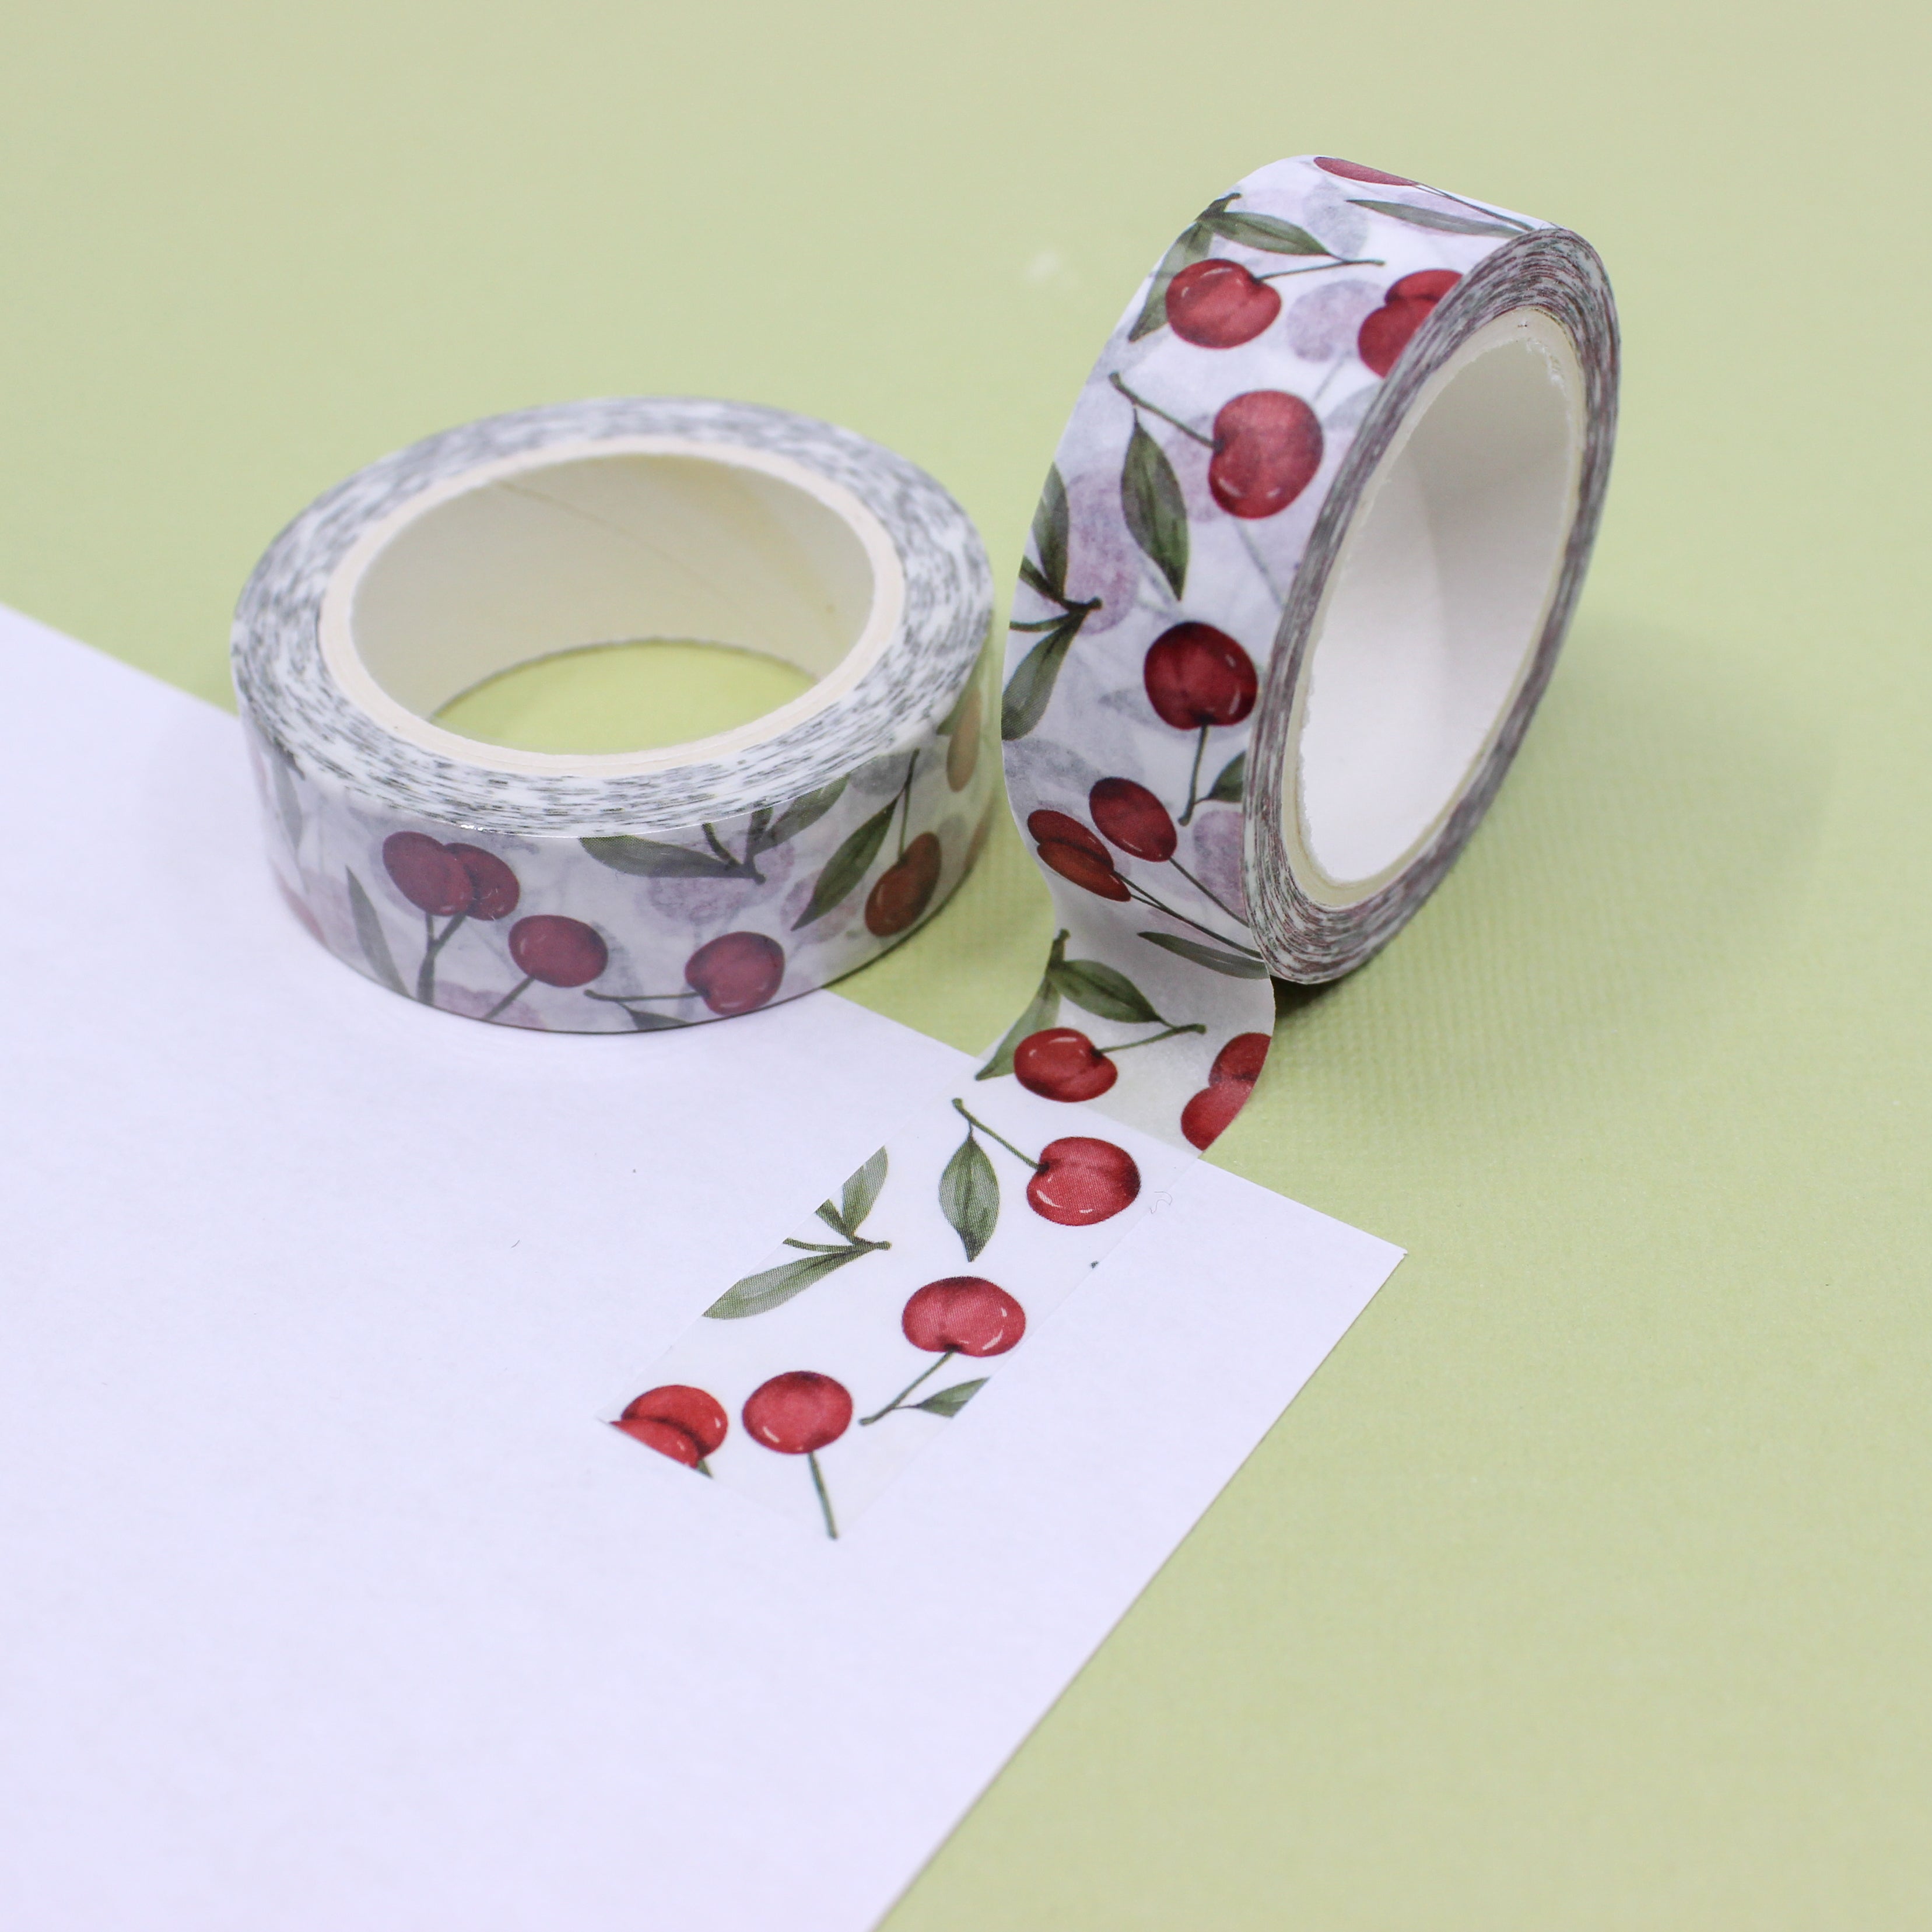 These are cherries tropical fruit collections pattern washi tape from BBB Supplies Craft Shop